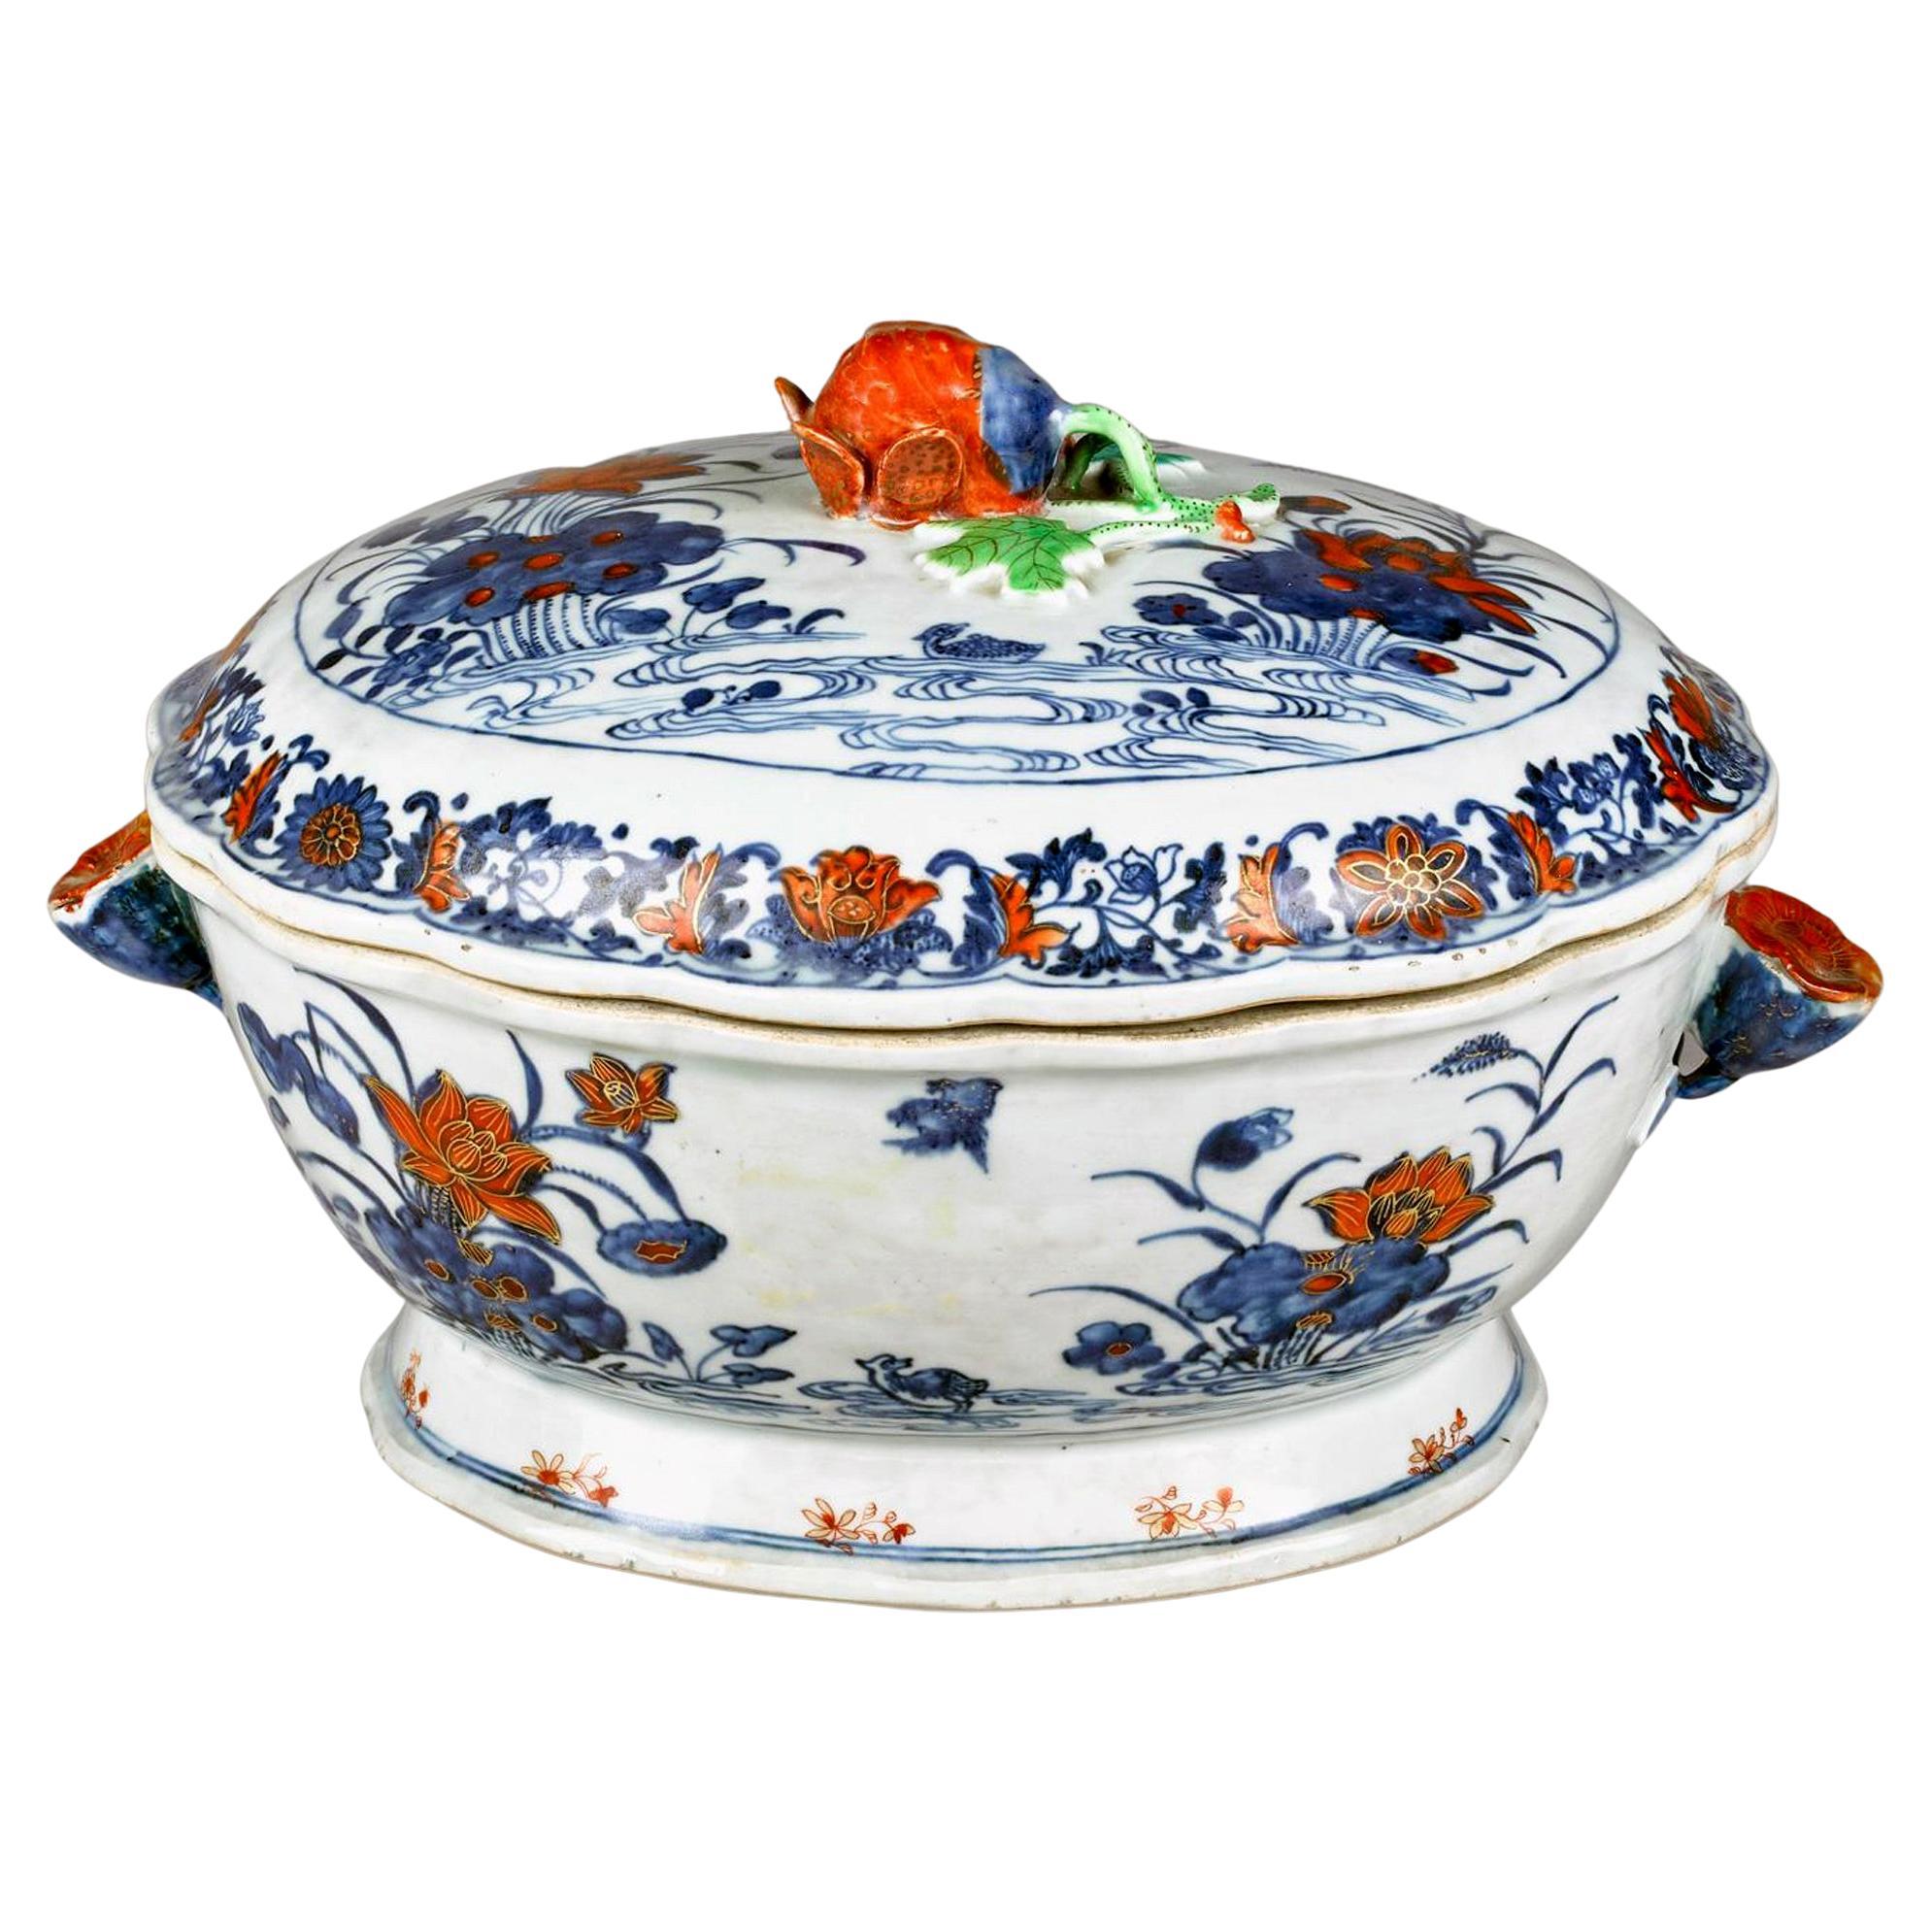 18th Century Chinese Export Porcelain Imari Tureen and Cover-Duck in Pond For Sale